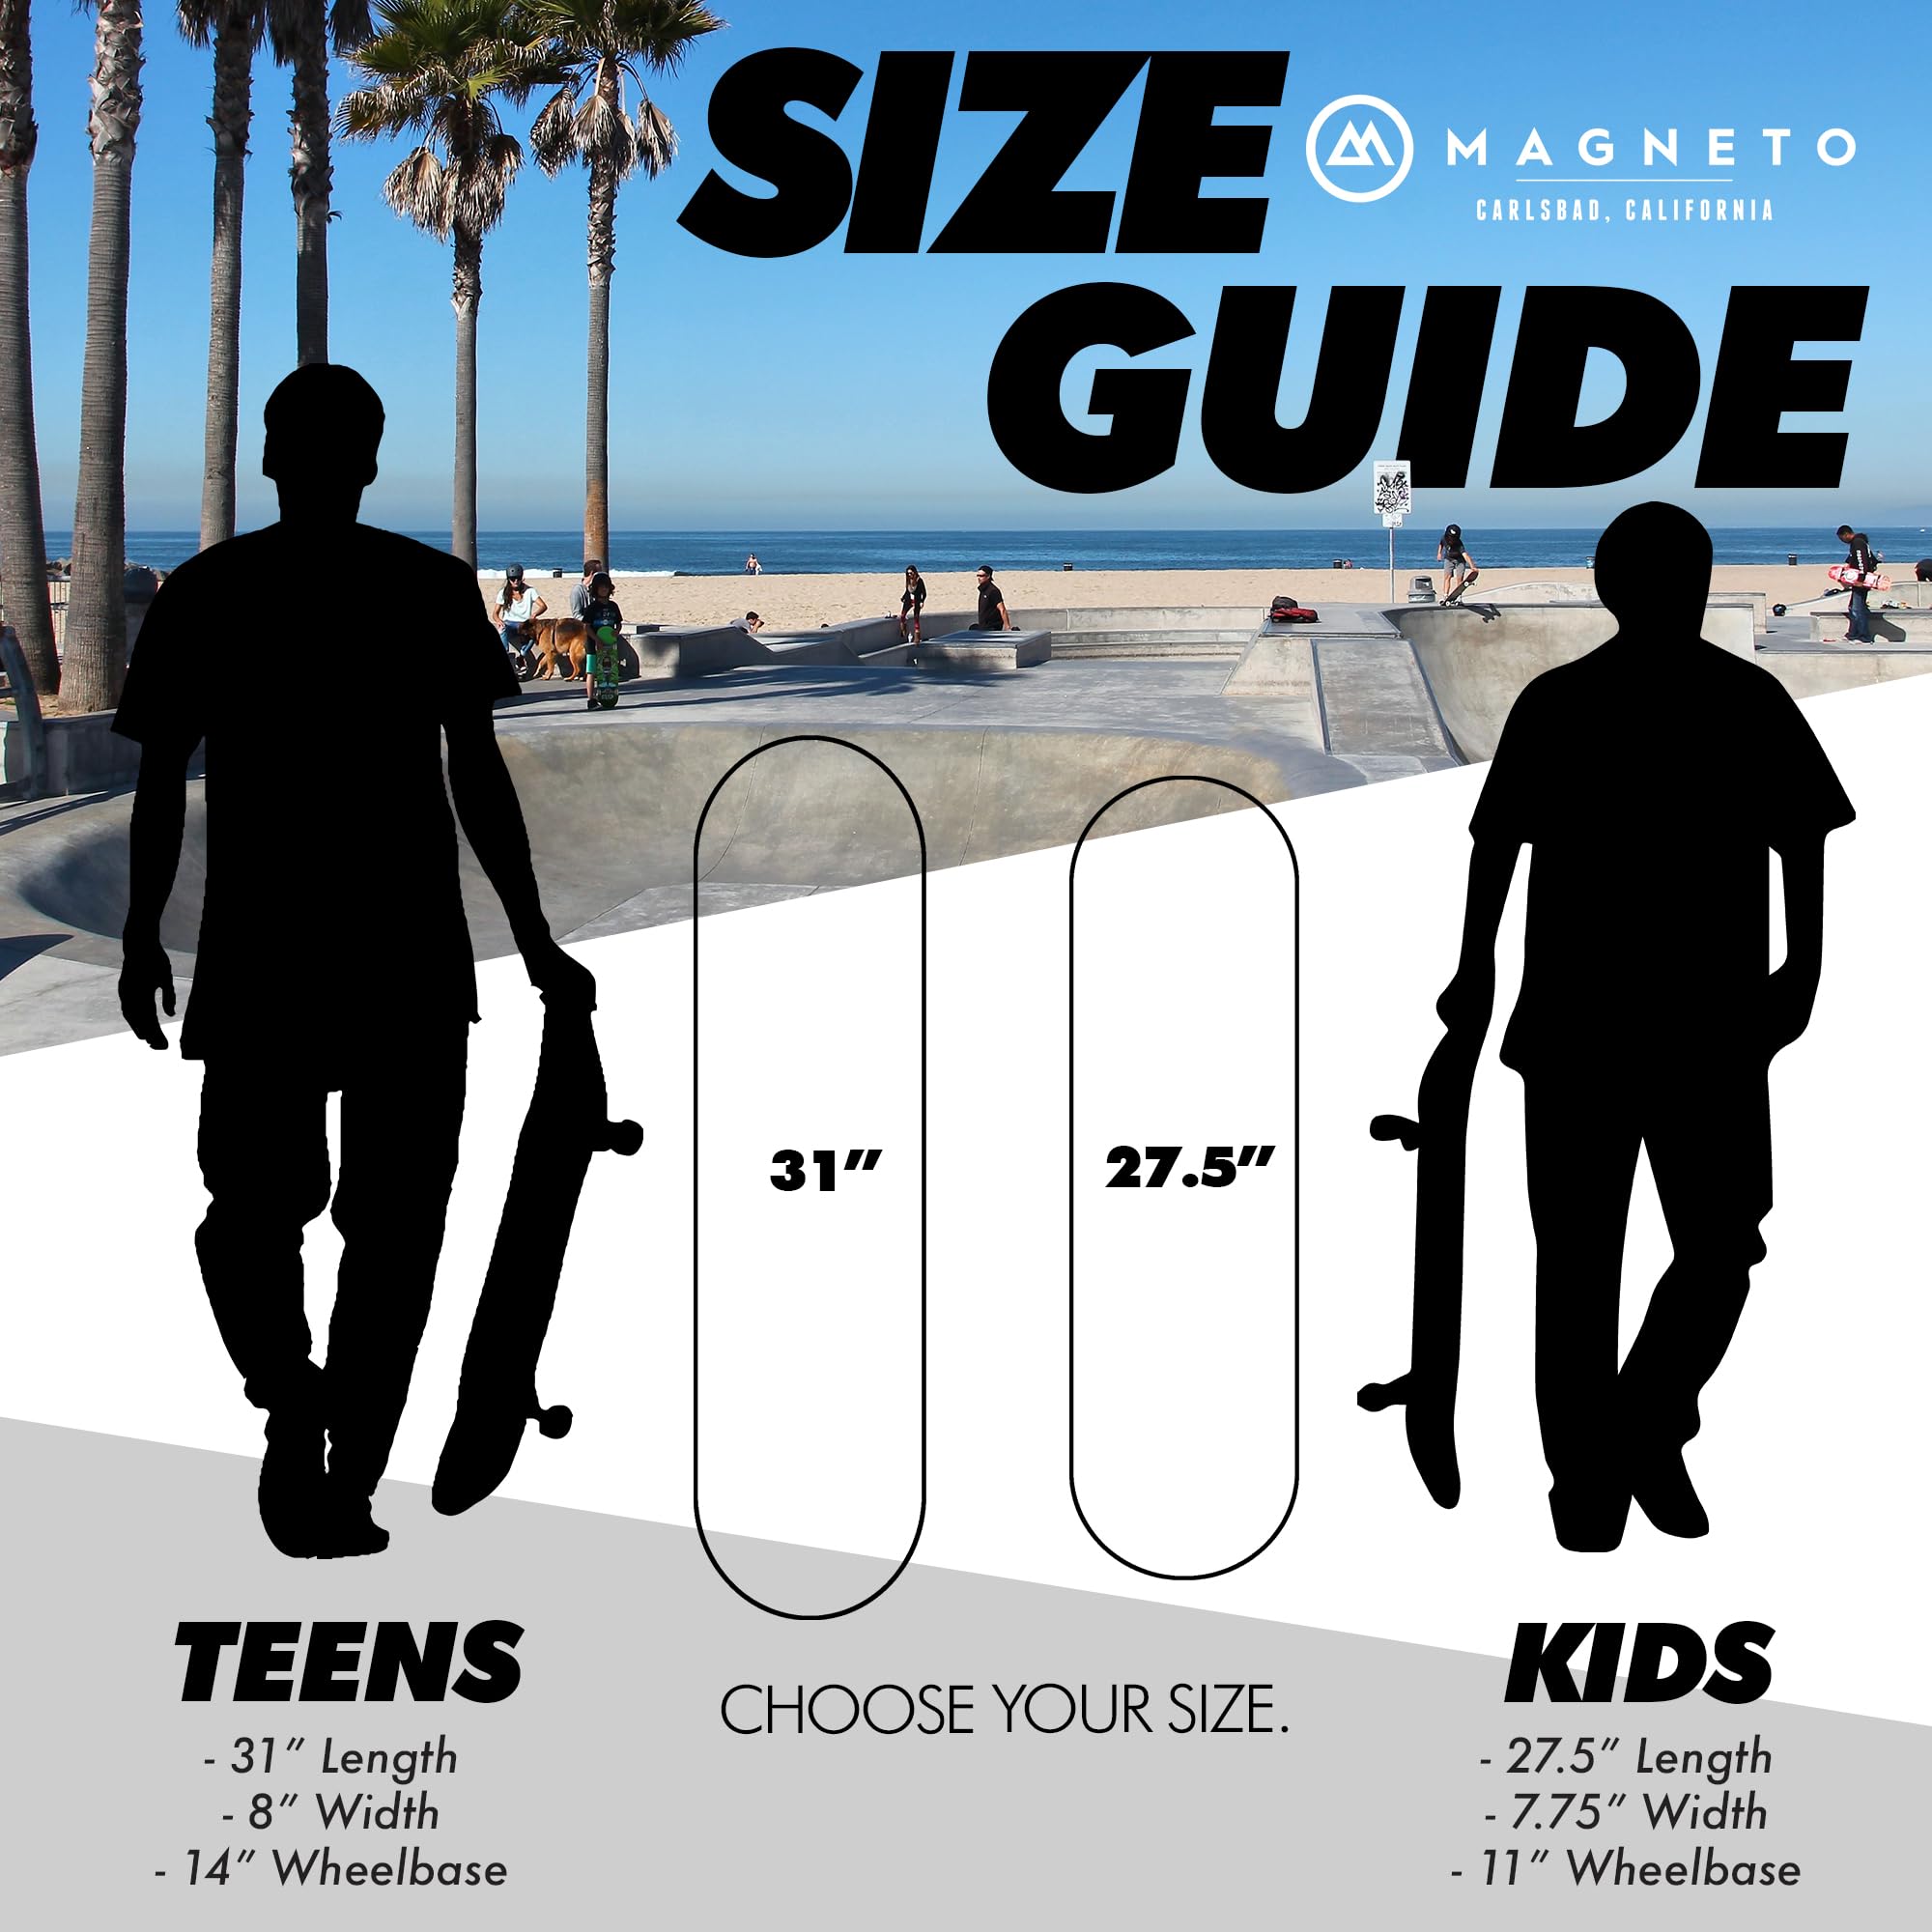 Magneto Complete Skateboard | 9-Layer Maple Wood | ABEC 5 Bearings, Smooth Wheels | Double Kick Concave Deck | Kids Skateboard Cruiser Skateboard | Skateboards for Beginners, Teens & Adults